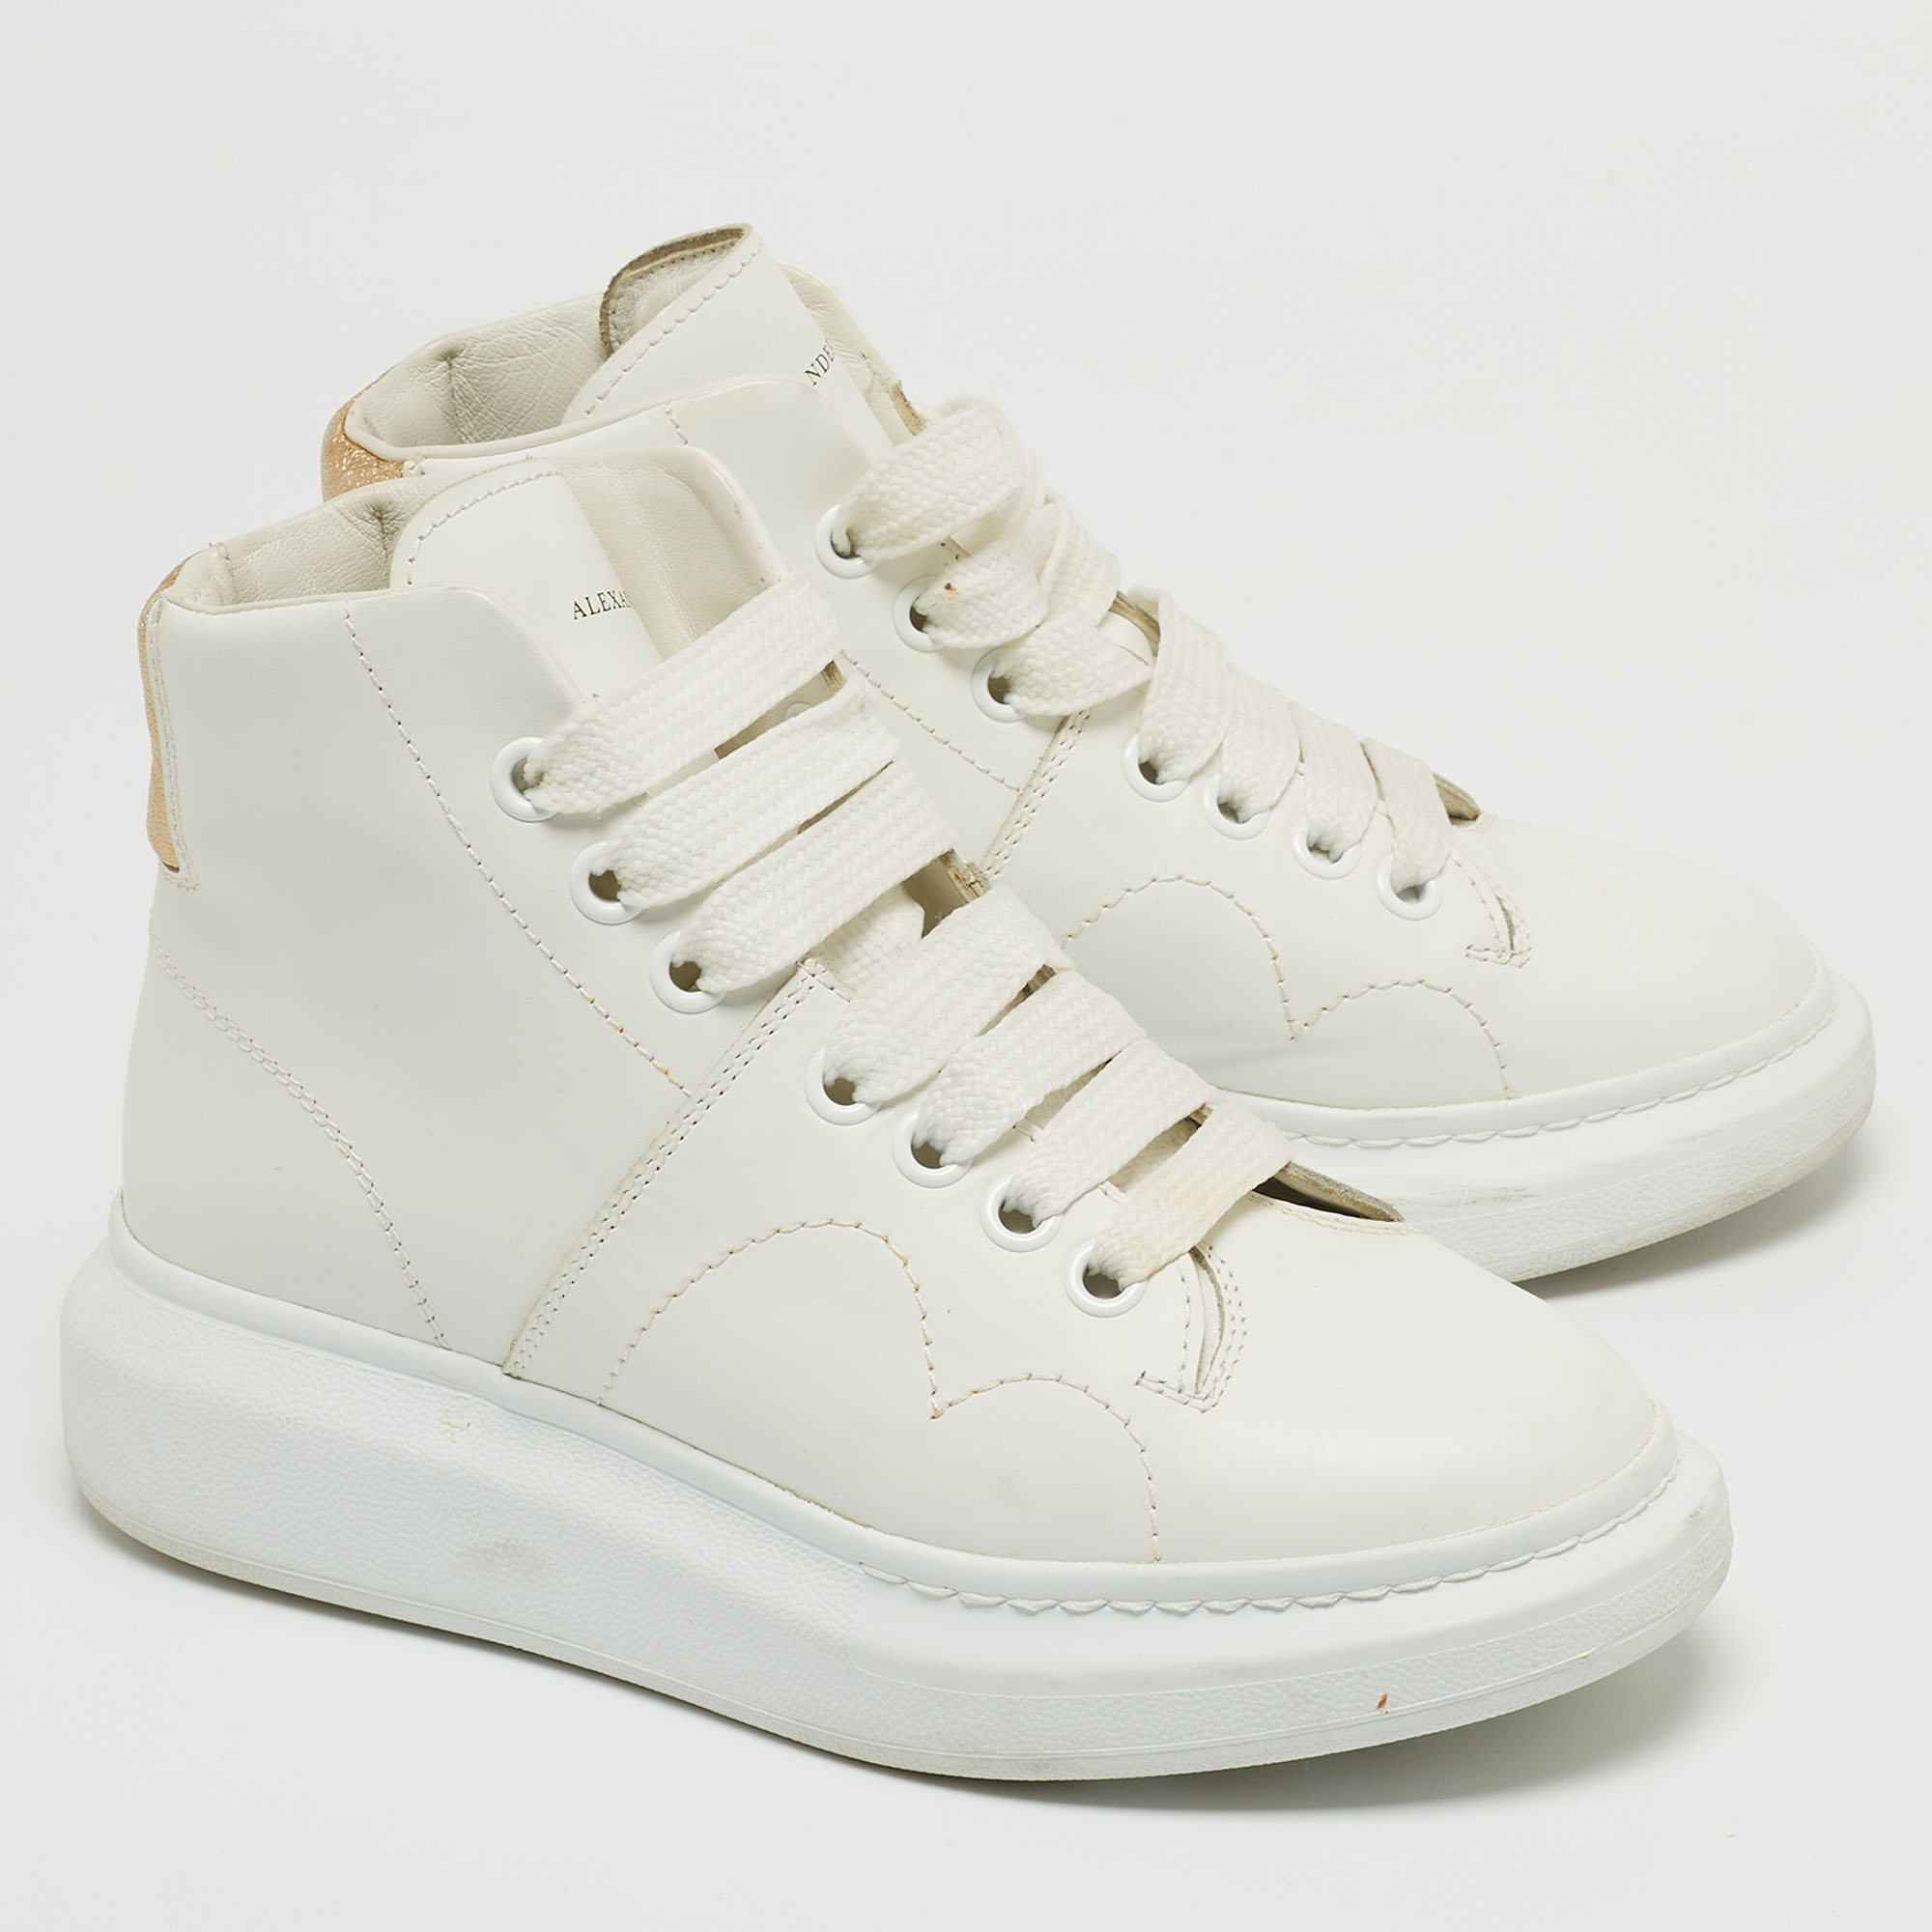 Alexander McQueen White Leather High Top Sneakers Size 36.5